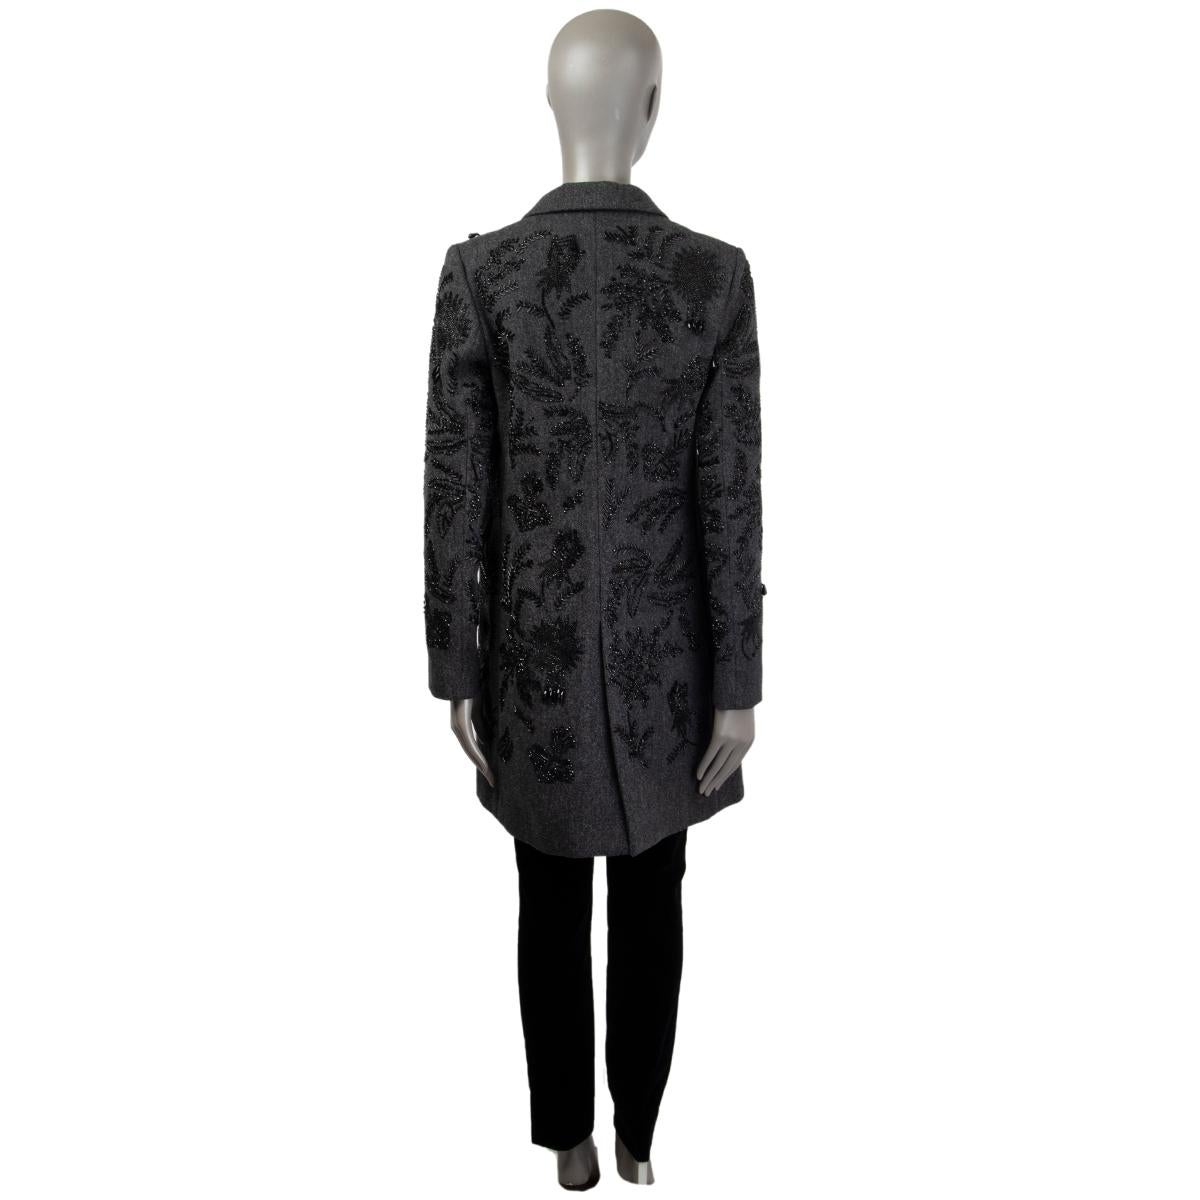 PRADA grey wool BEAD EMBELLISHED DOUBLE BREASTED Coat Jacket S In Excellent Condition For Sale In Zürich, CH